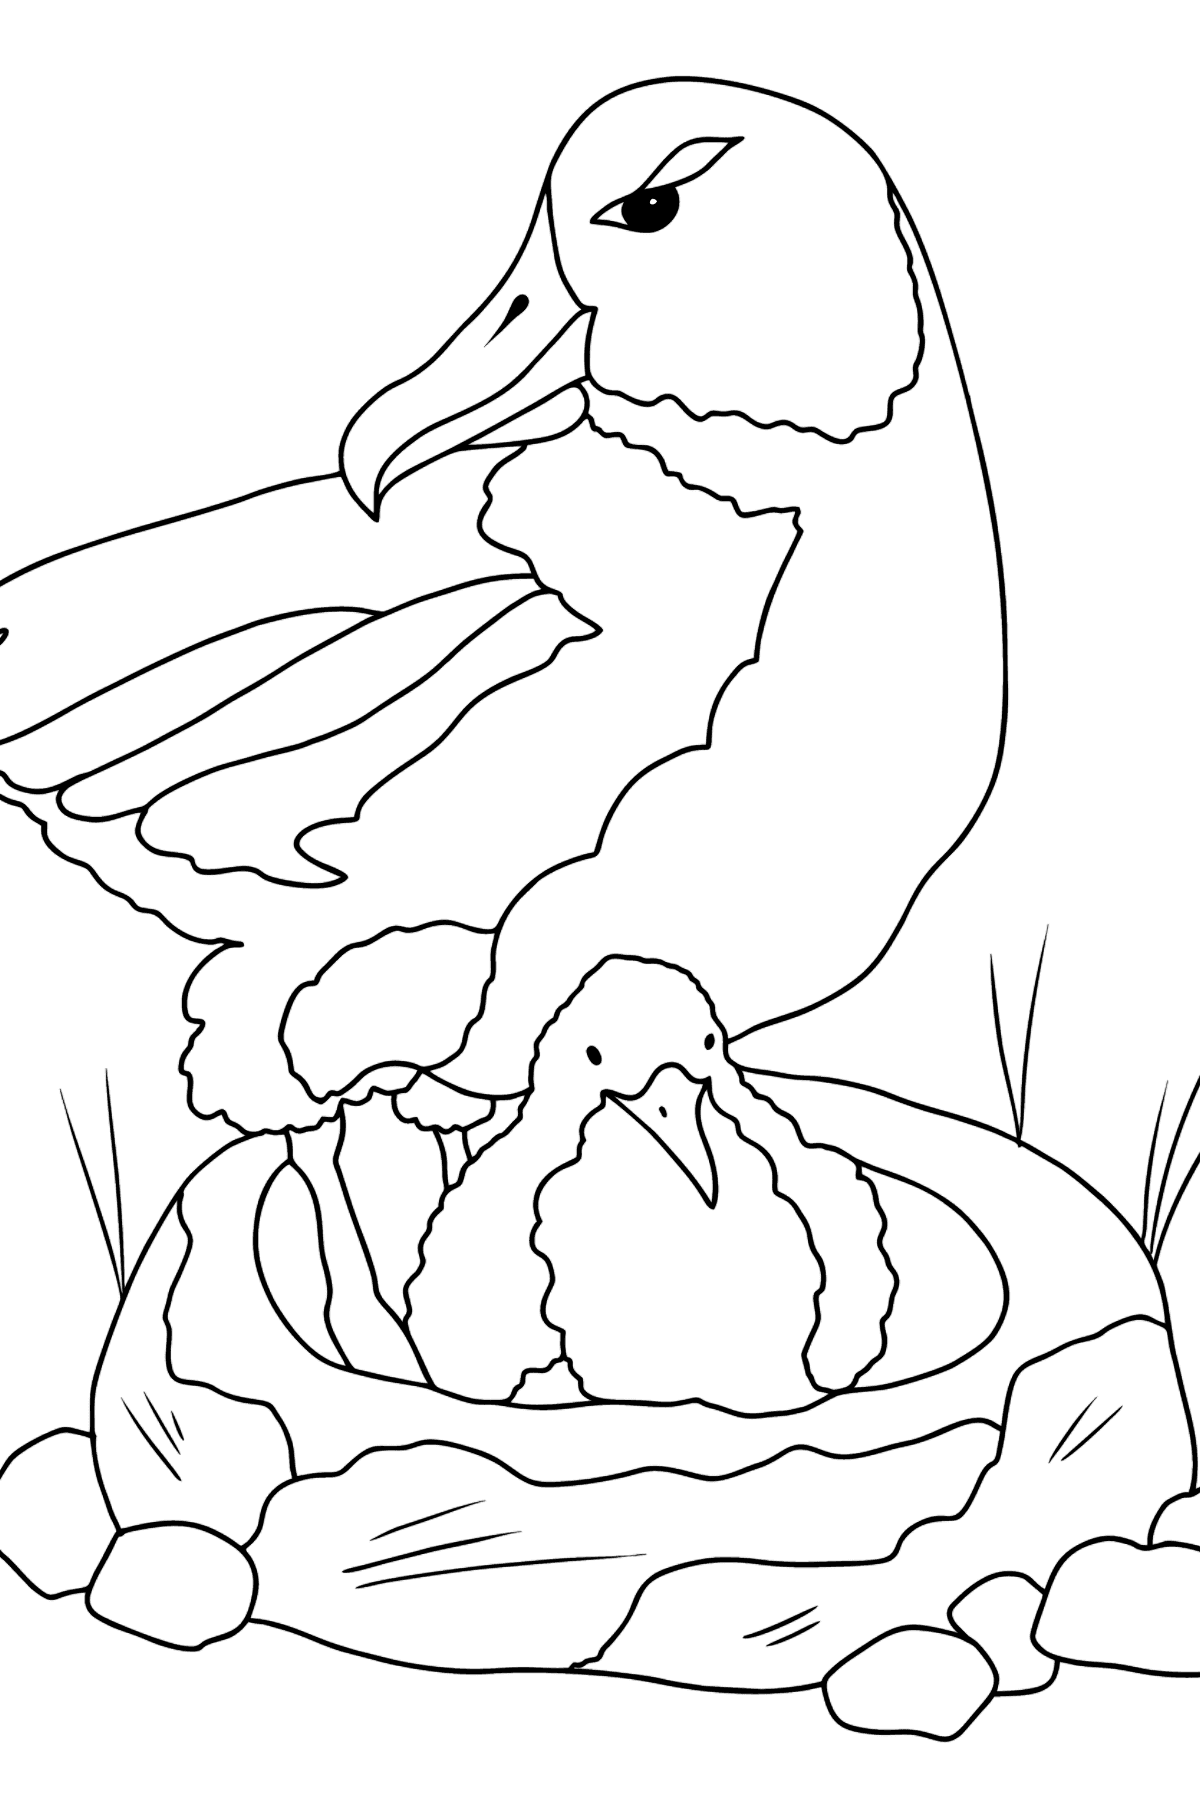 Coloring Page - An Albatross with a Nestling - Coloring Pages for Kids